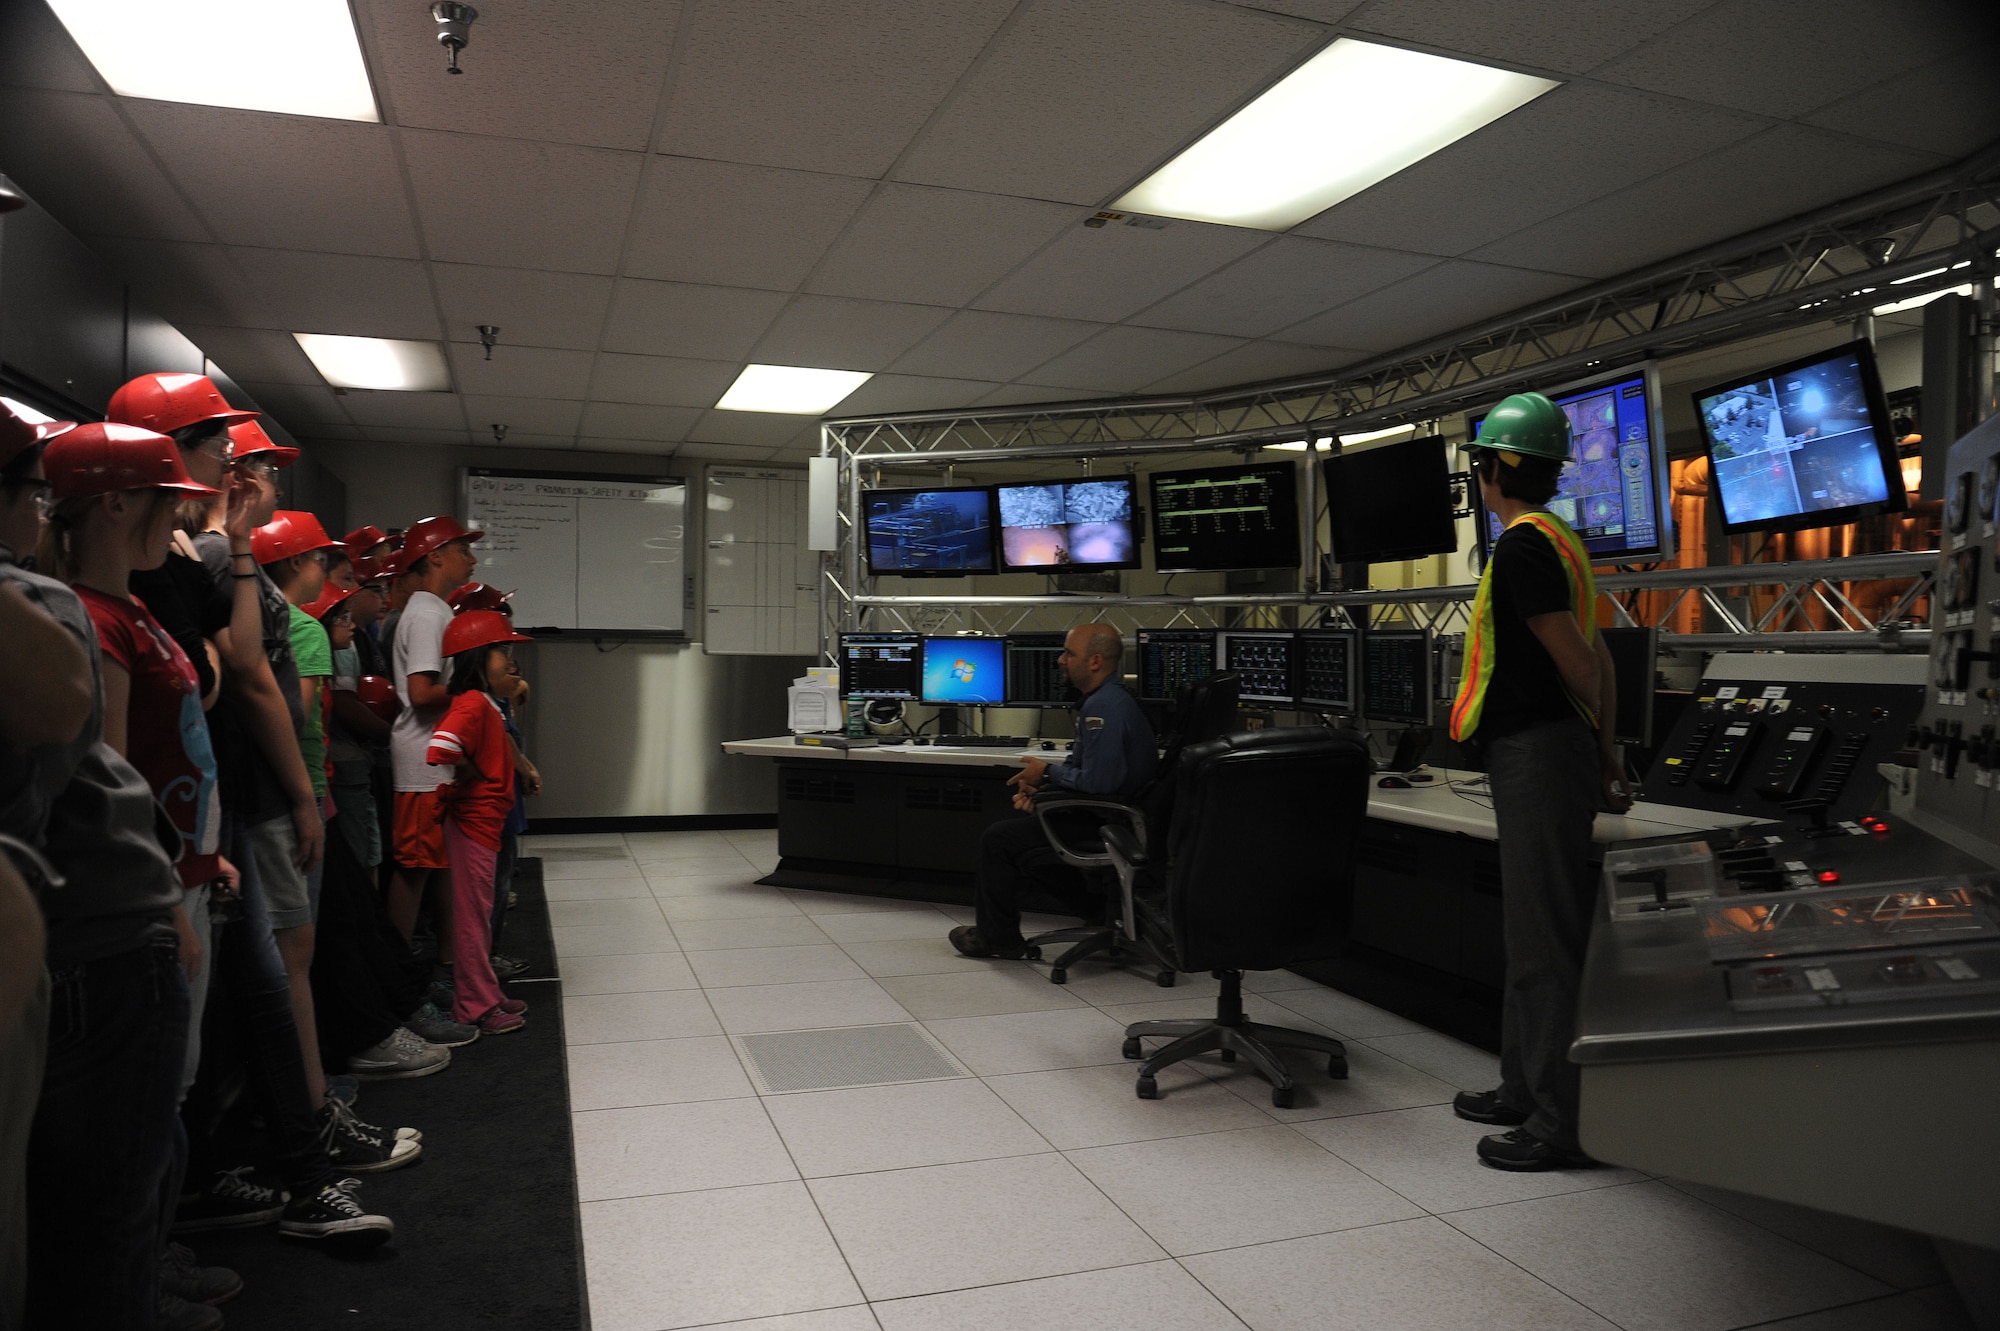 Employees of the City of Spokane’s Waste to Energy plant discuss the inner workings of the facility’s control room with school students near Spokane, Wash., June 16, 2015. The non-profit facility generates enough power for 13,000 homes each day, using the revenue from the sale of electricity and dumping fees to fund its operations. (U.S. Air Force photo/Senior Airman Sam Fogleman)